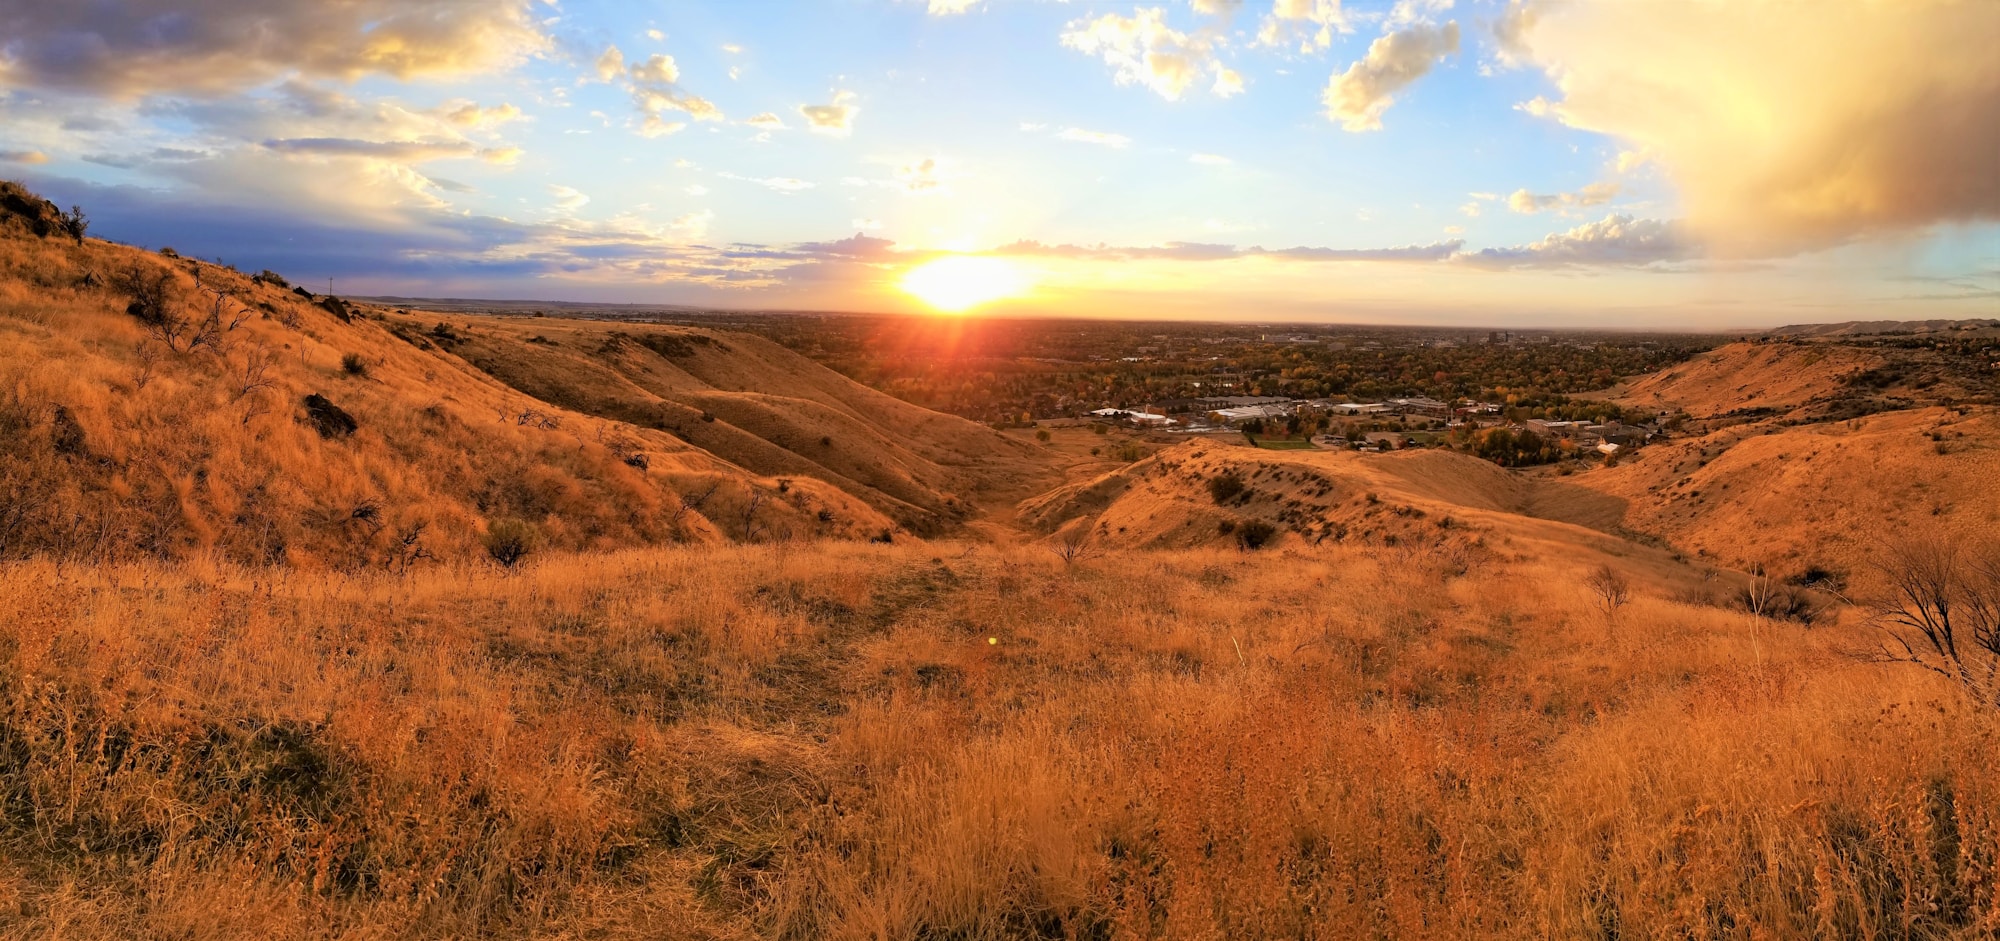 What to See in Boise: Travel Guide